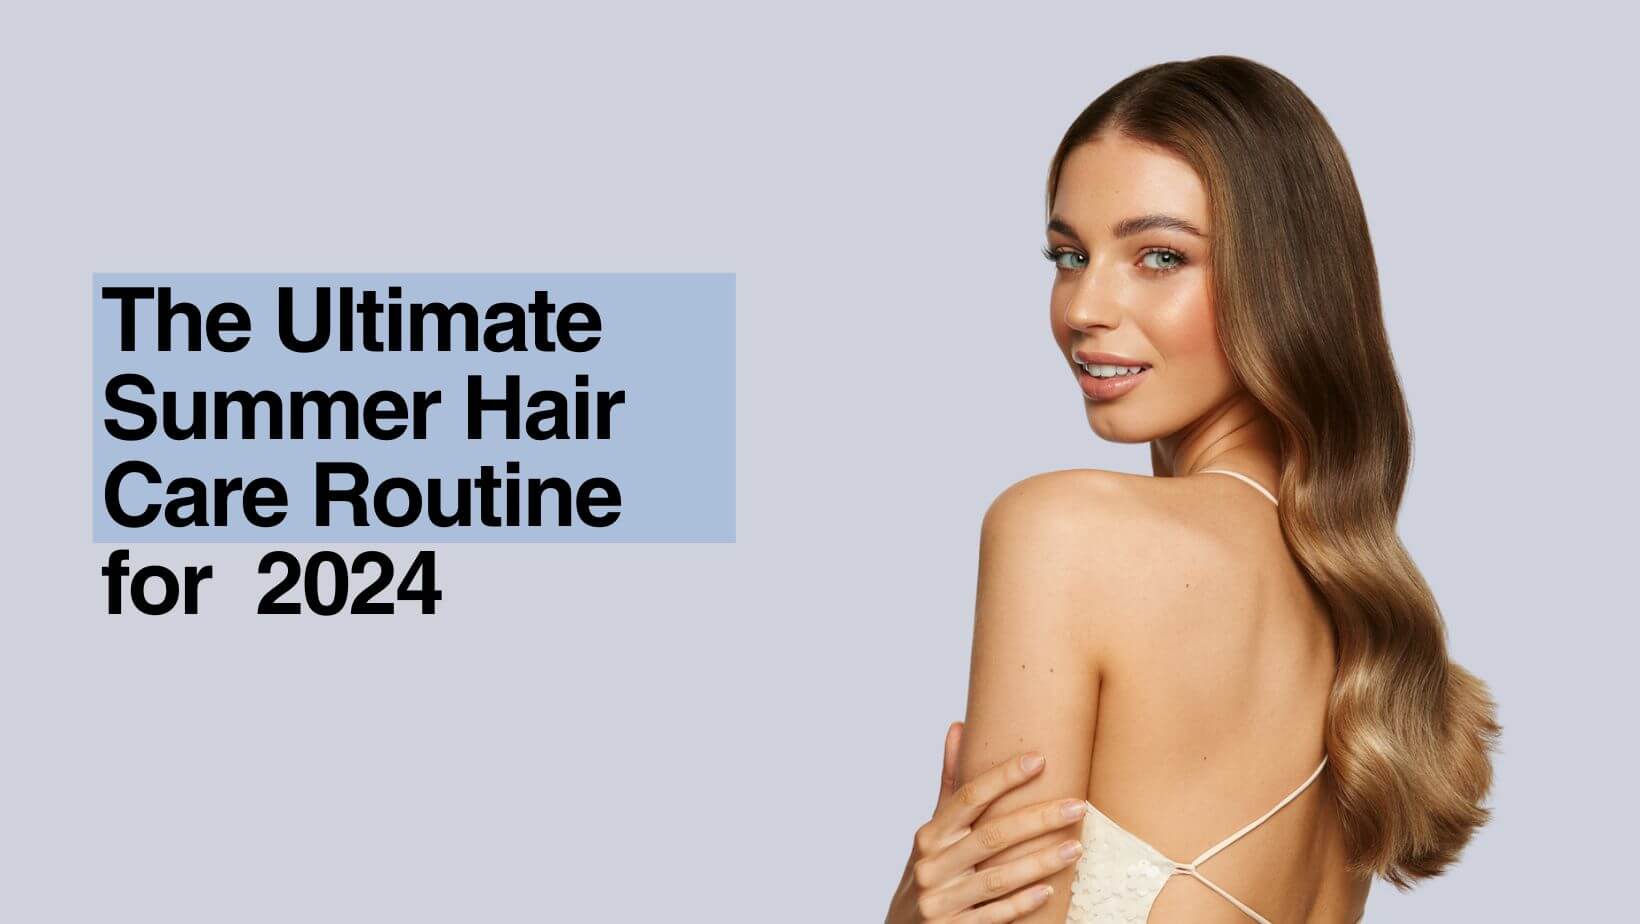 The Ultimate Summer Hair Care Routine 2024